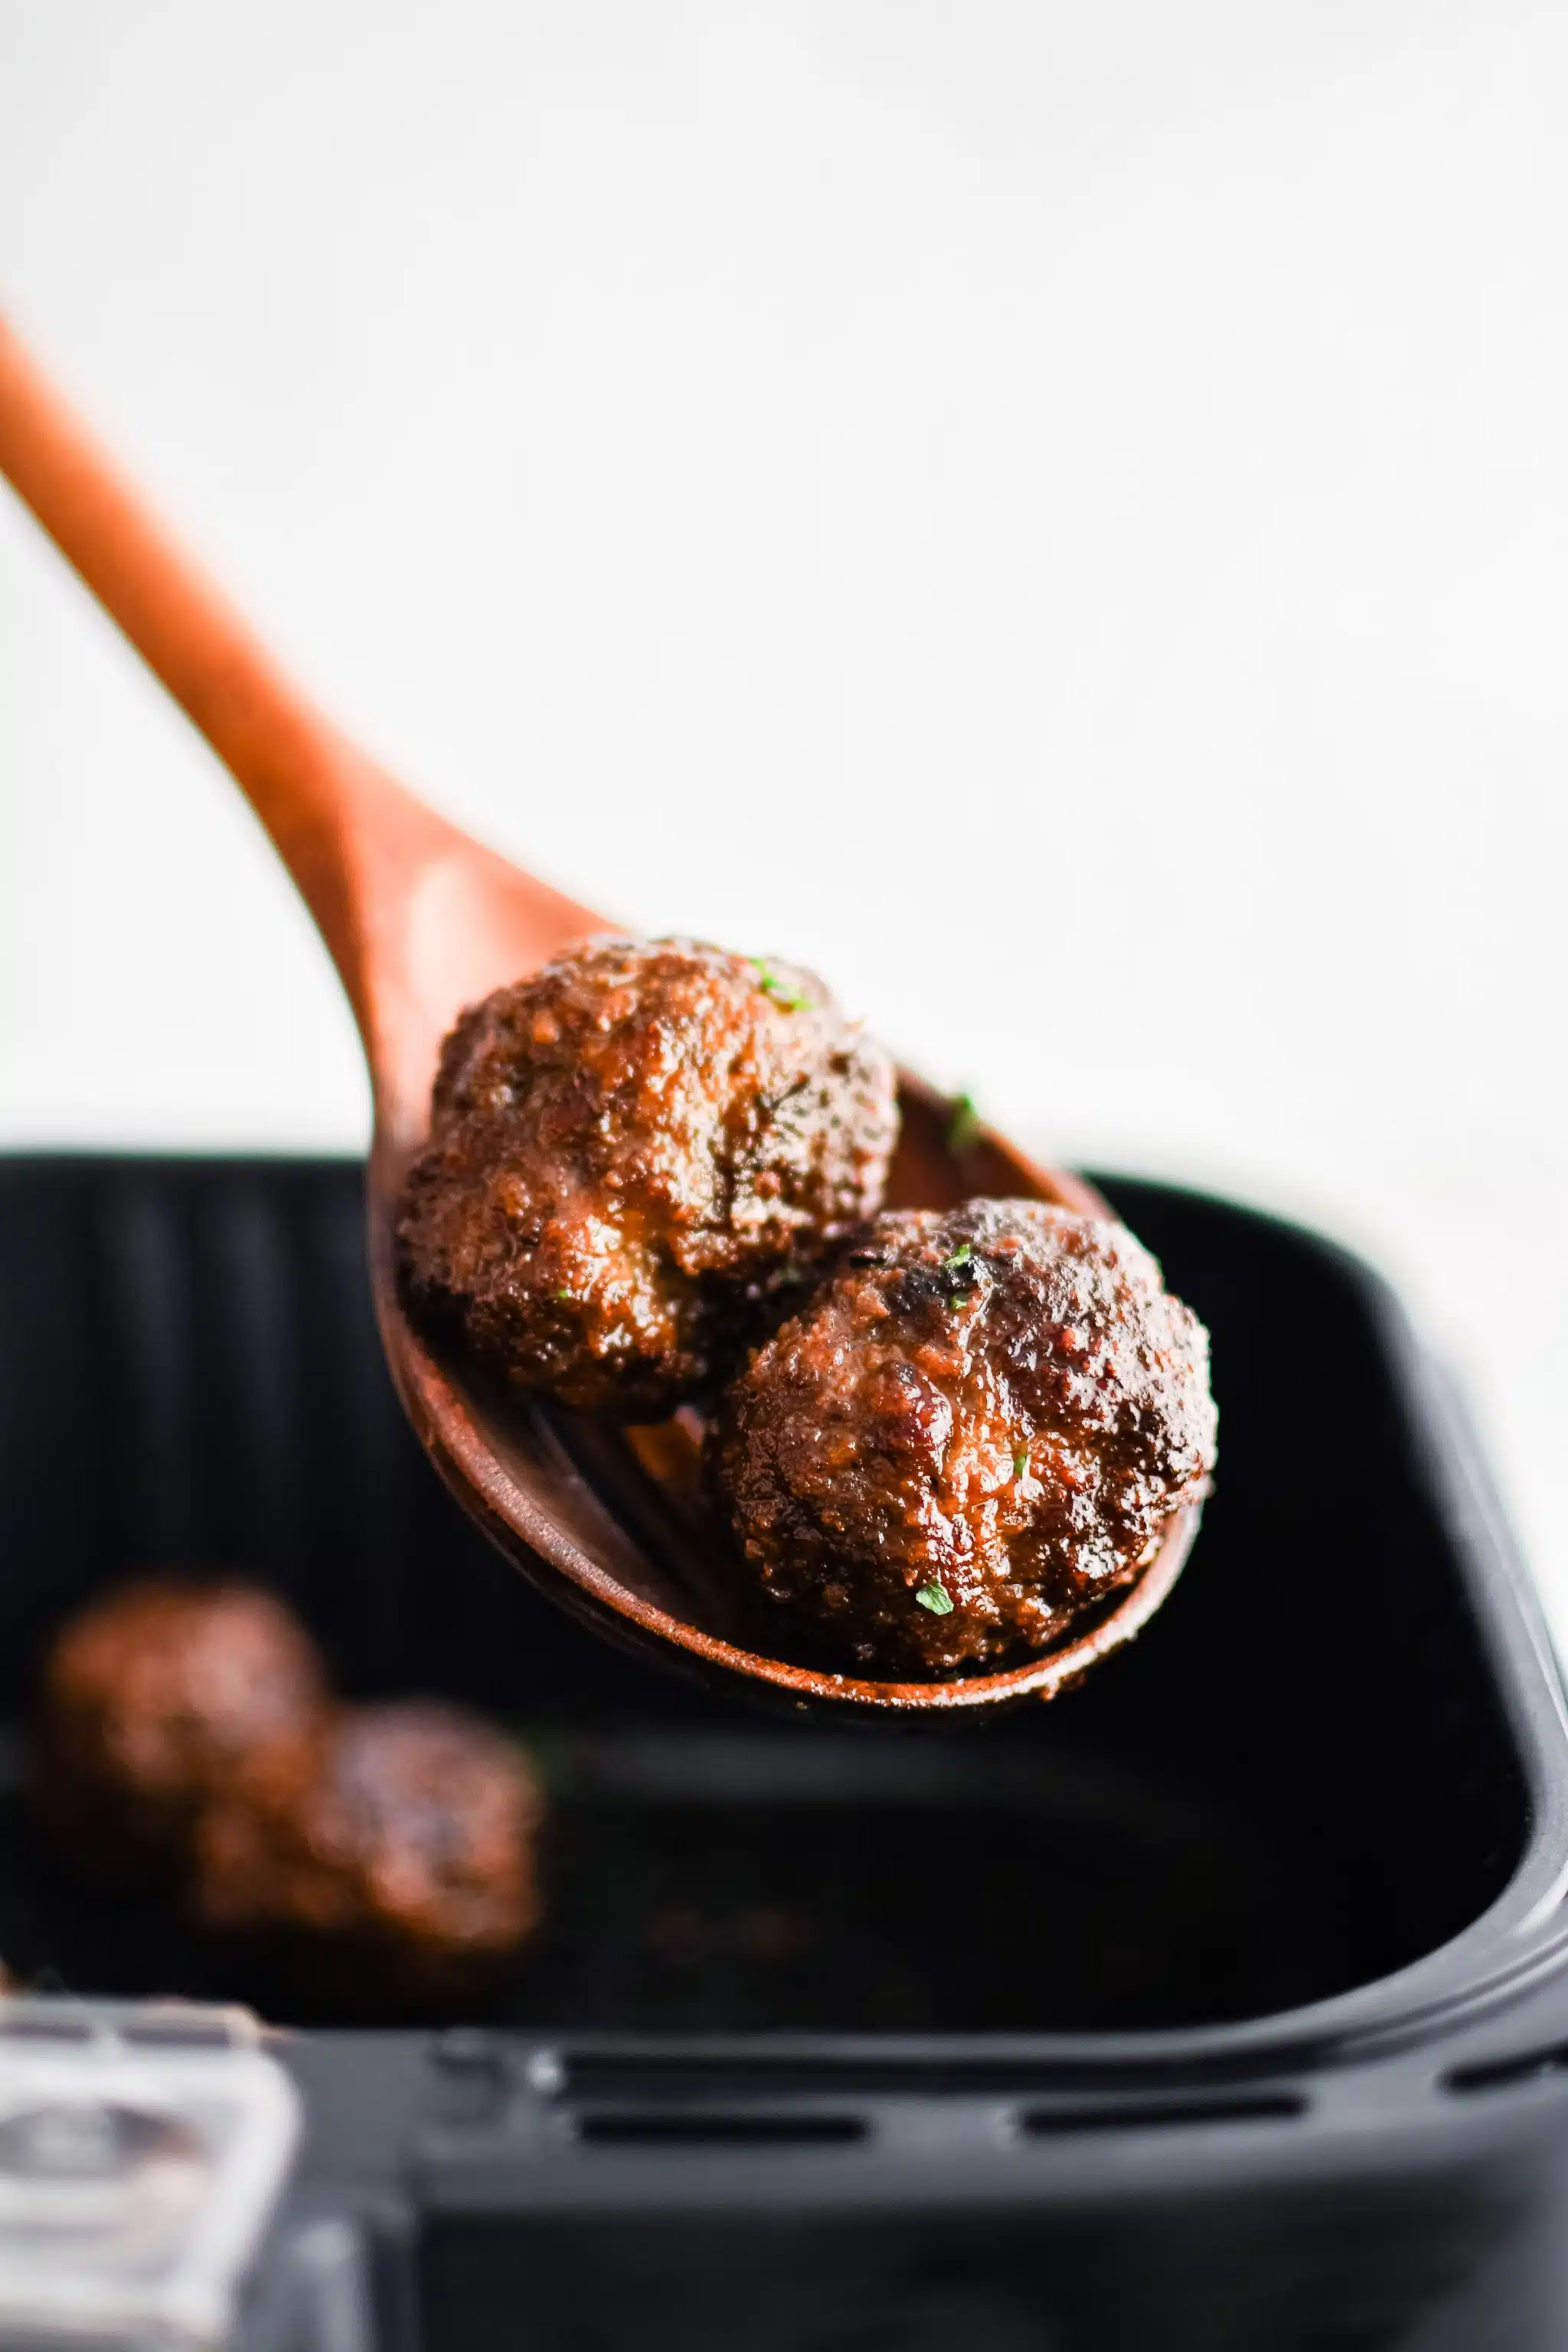 Wooden spoon holding two beef meatballs hovering above a large airfryer basket filled with the remaining cooked meatballs.